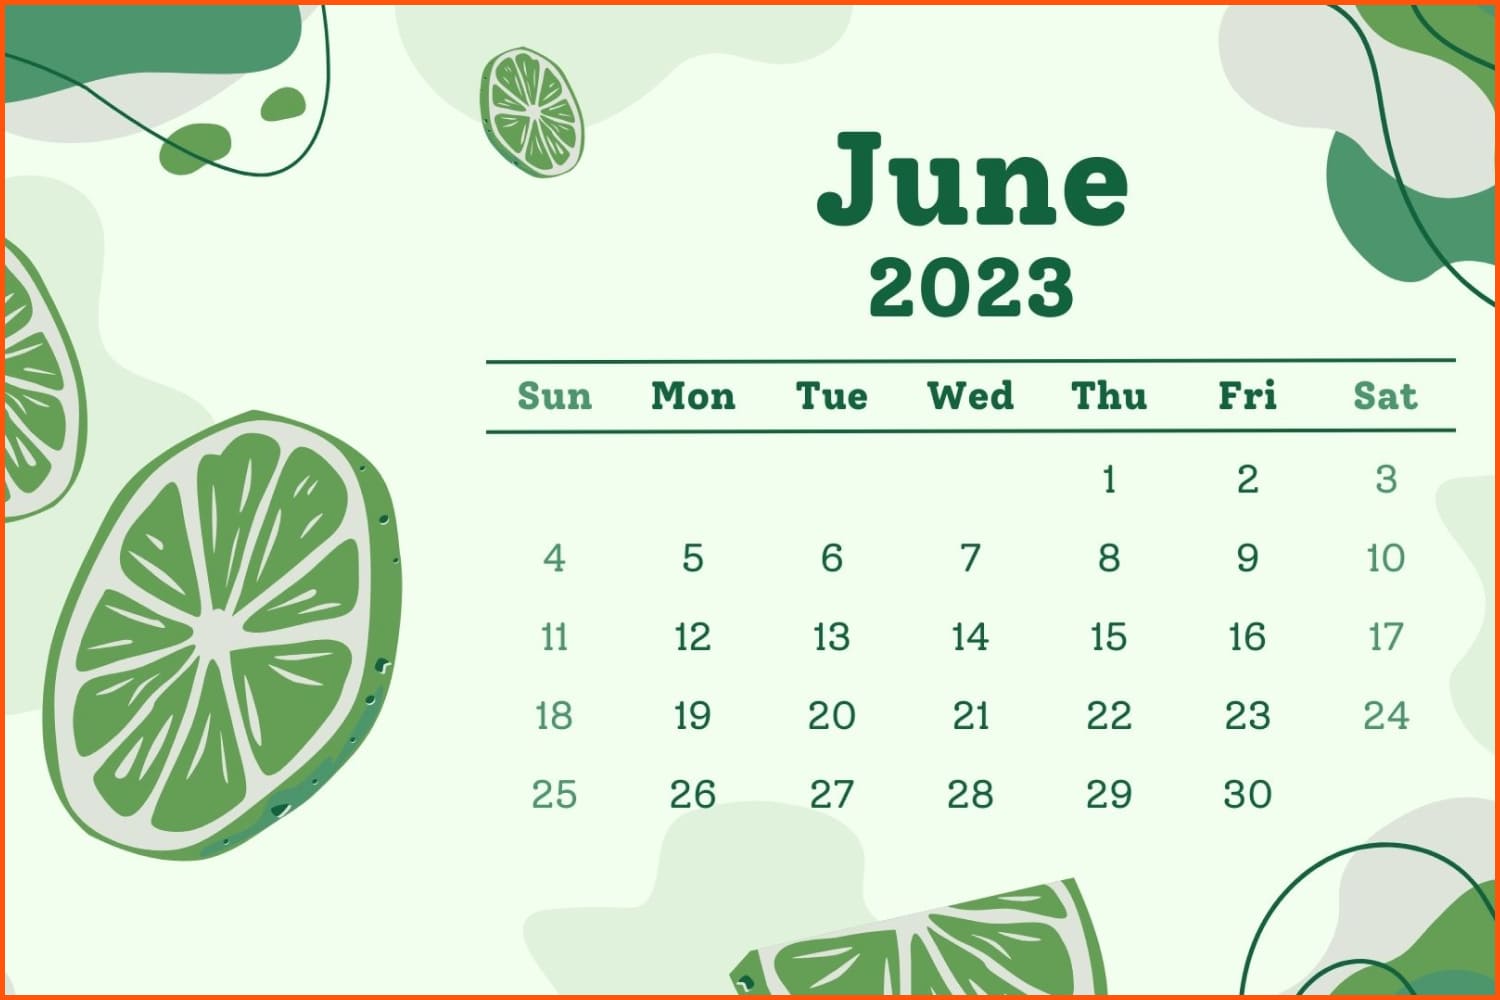 June calendar with green background and drawings of lemon slices.